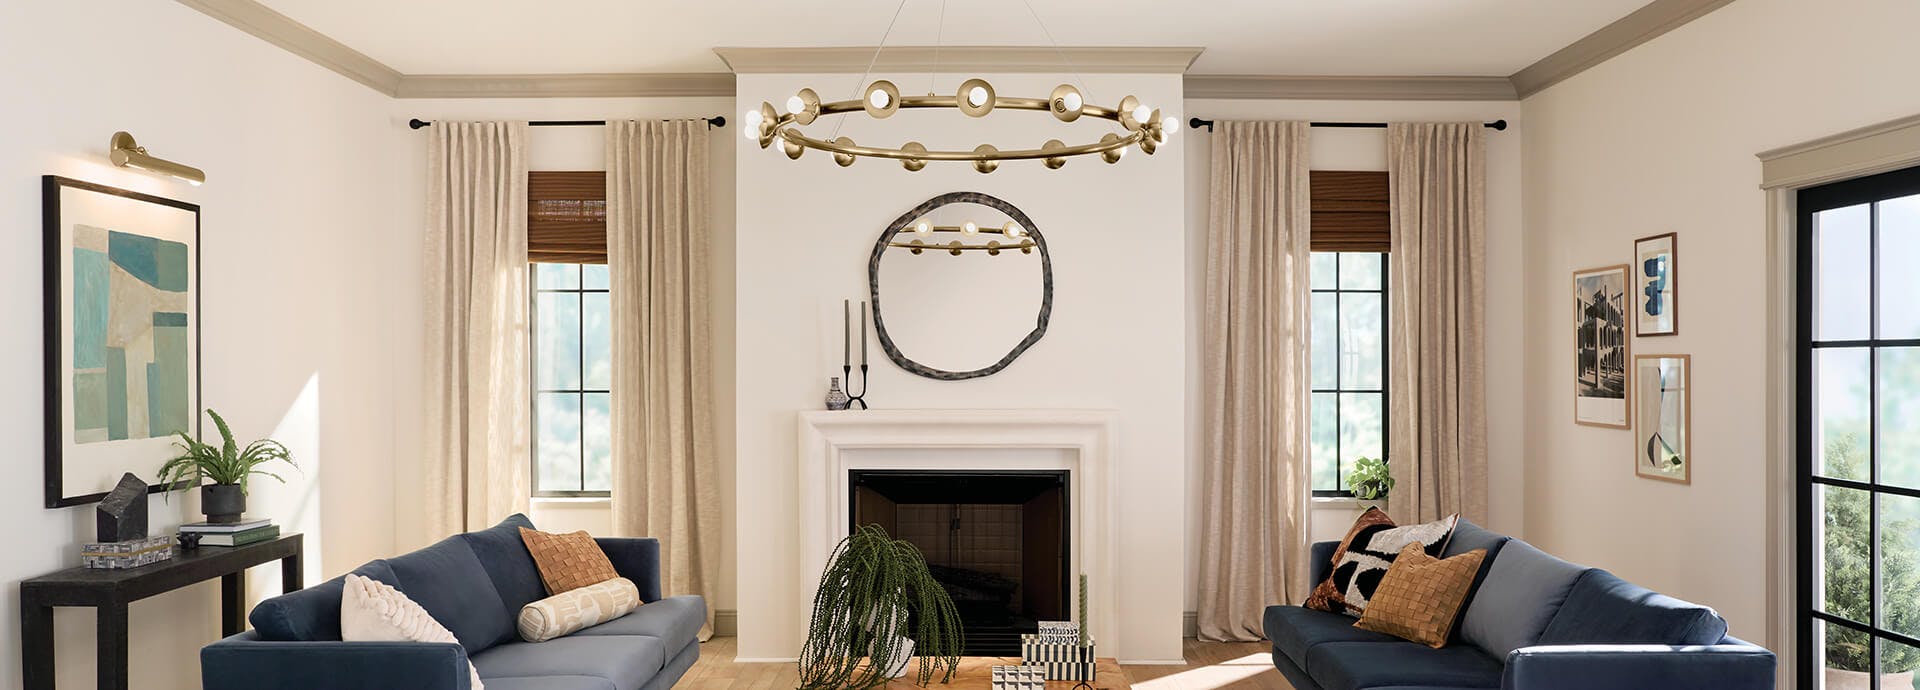 Living room during the day with a palta chandelier in the center of the room in gold finish